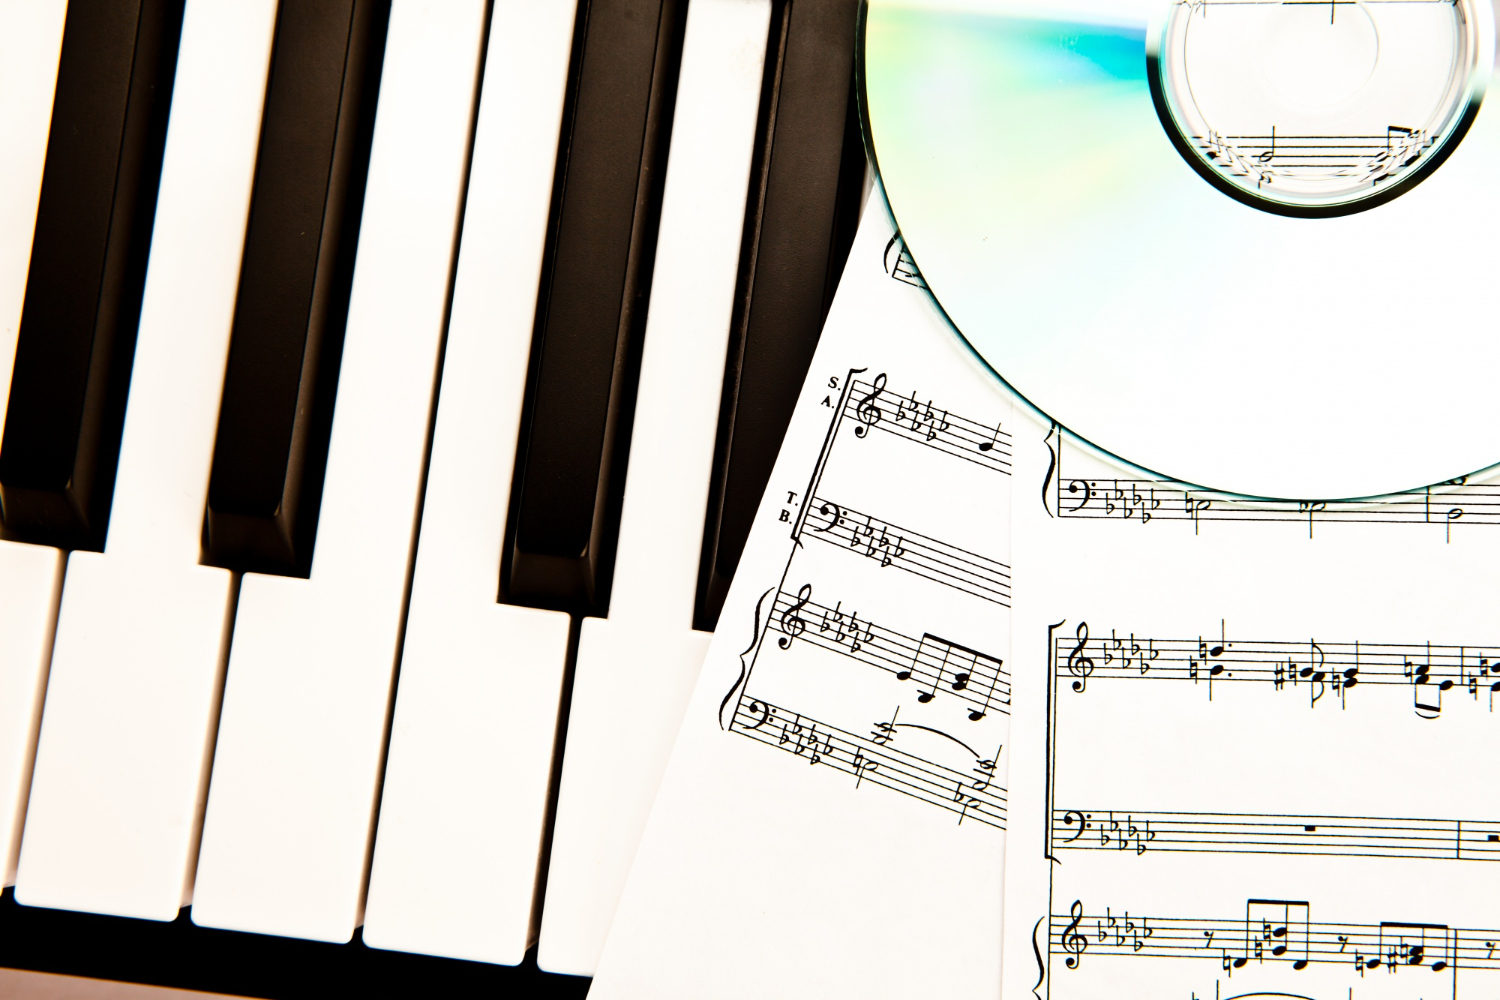 compact disc music scores placed piano